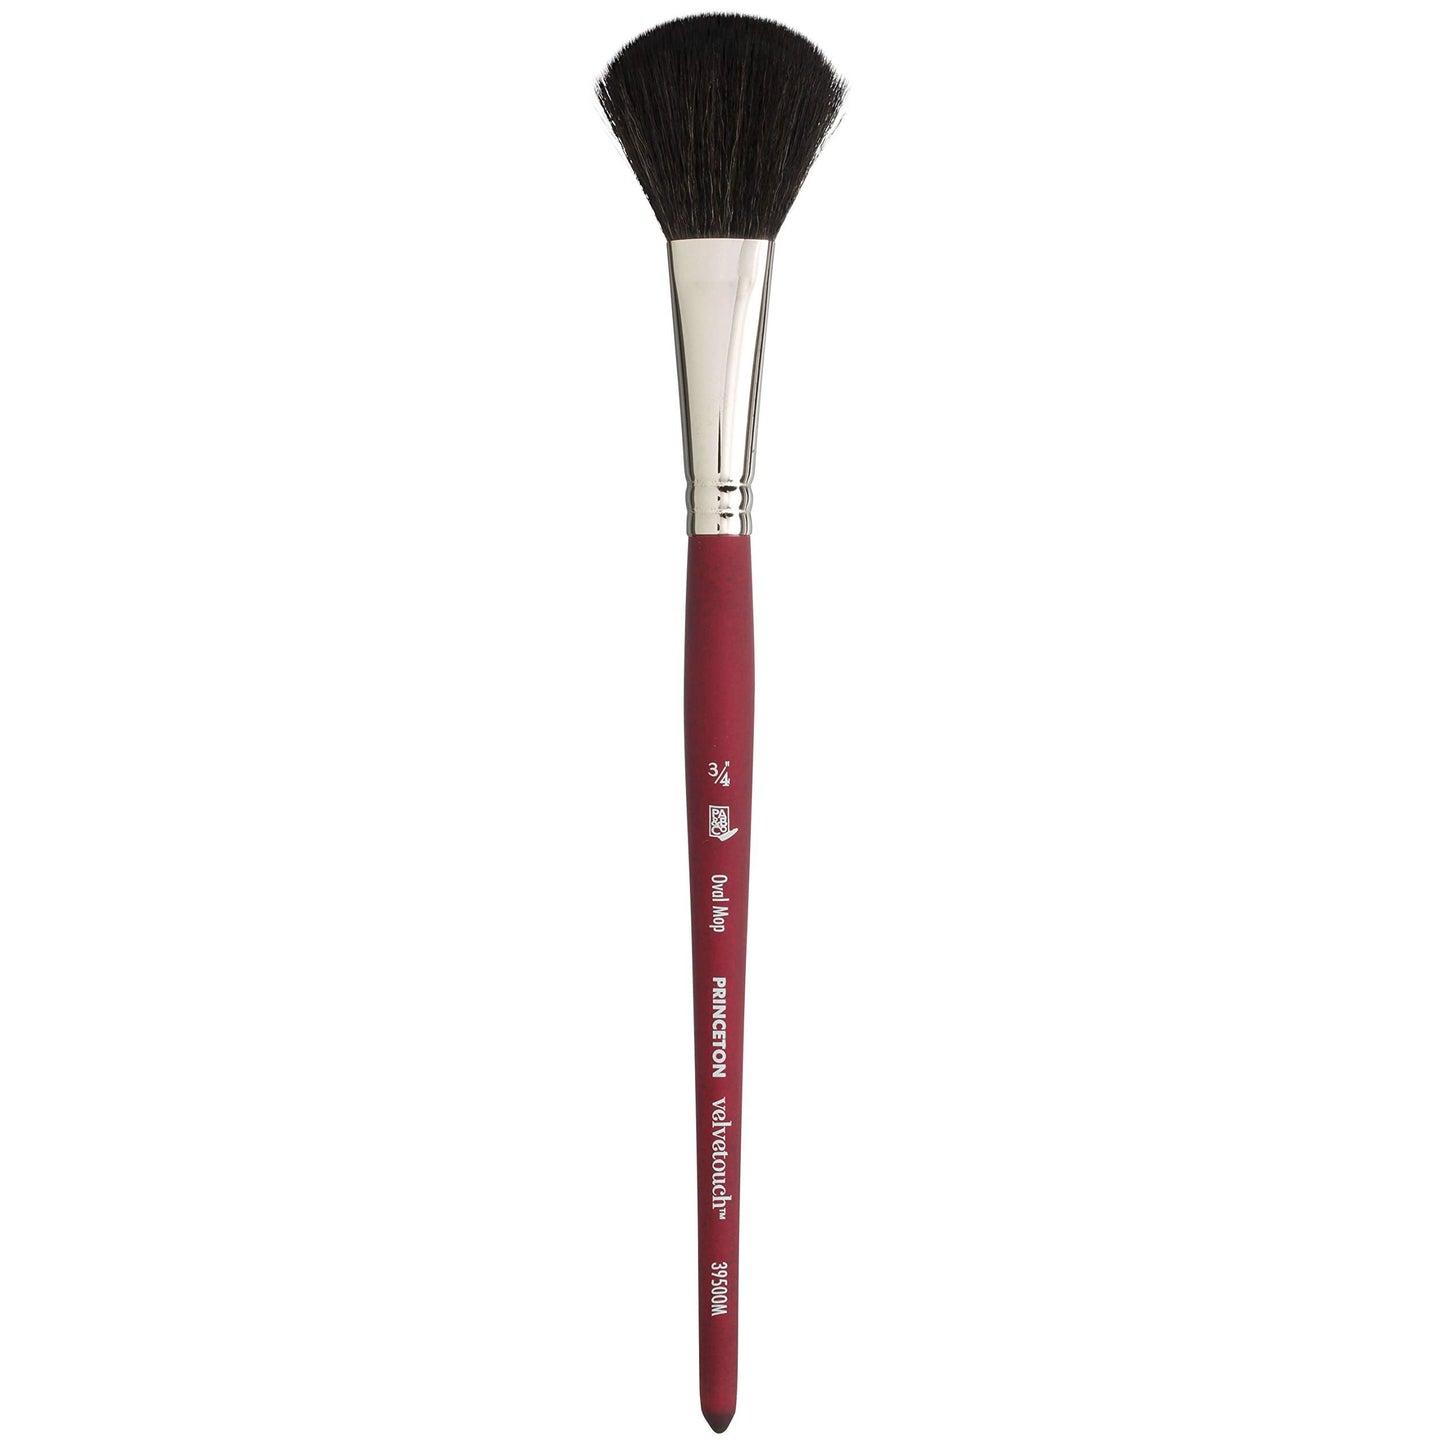 Princeton Velvetouch Mixed Media Brushes Oval Mop